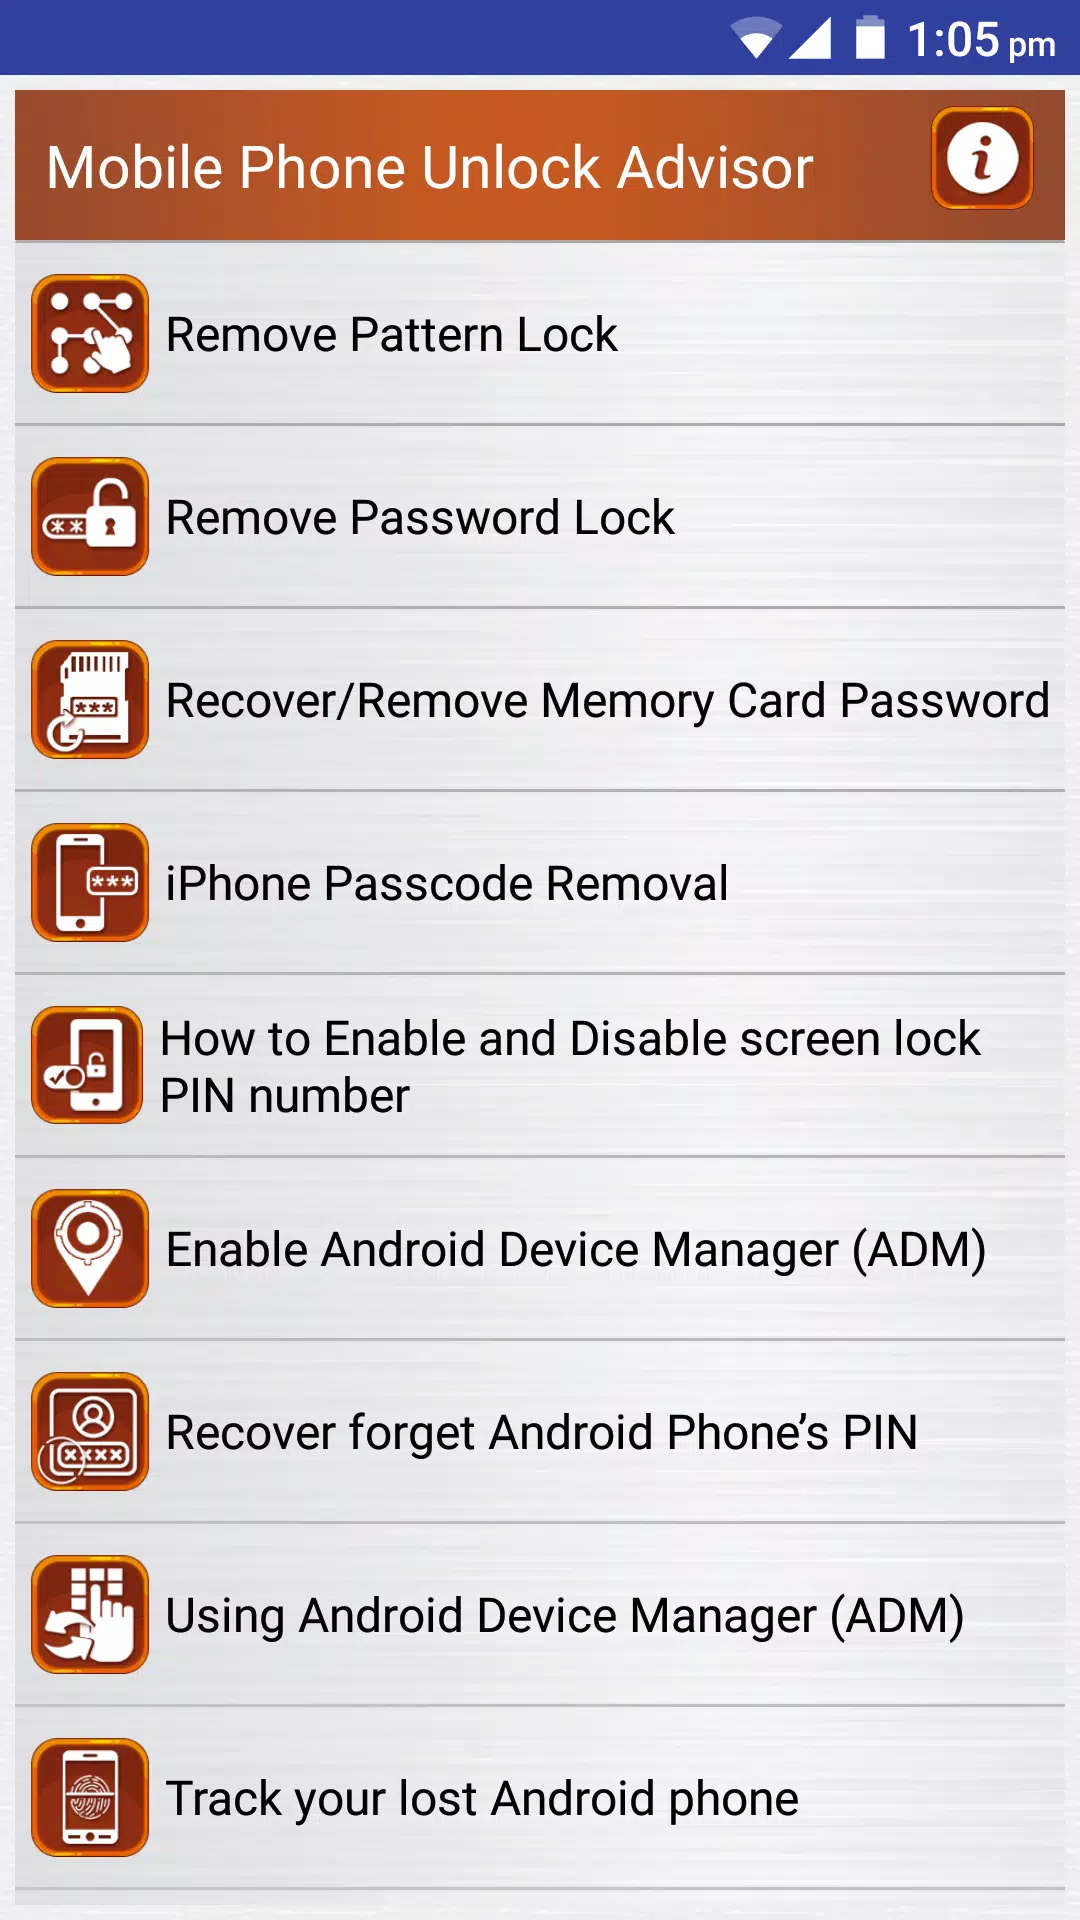 Download do APK de Clear Mobile Password PIN Help para Android